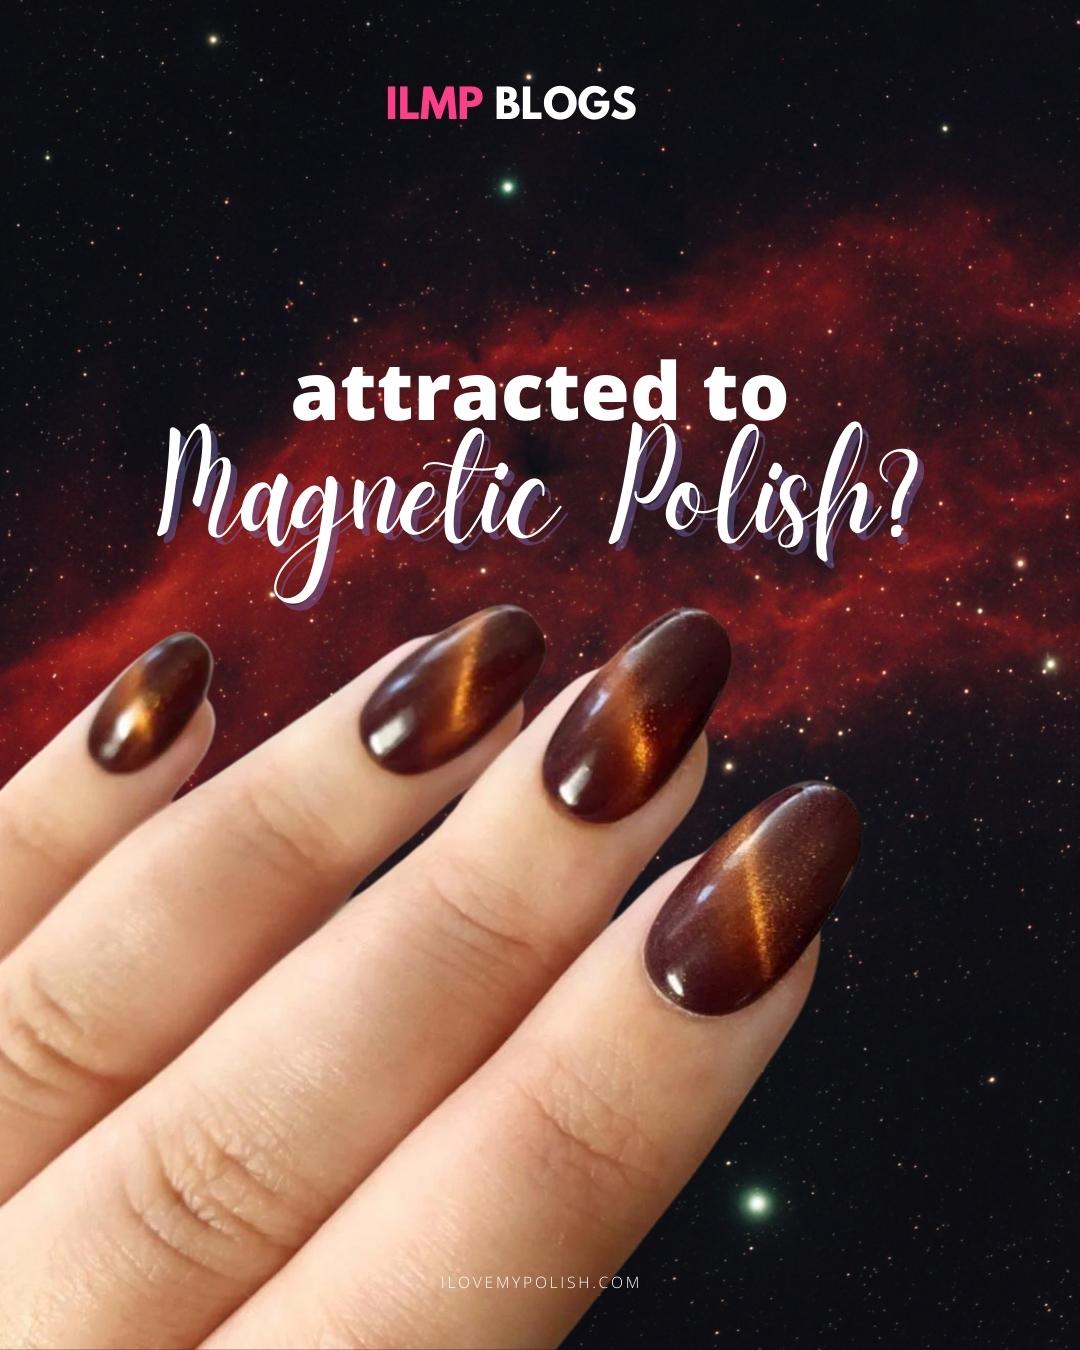 Attracted to Magnetic polishes? Here's how you use it!